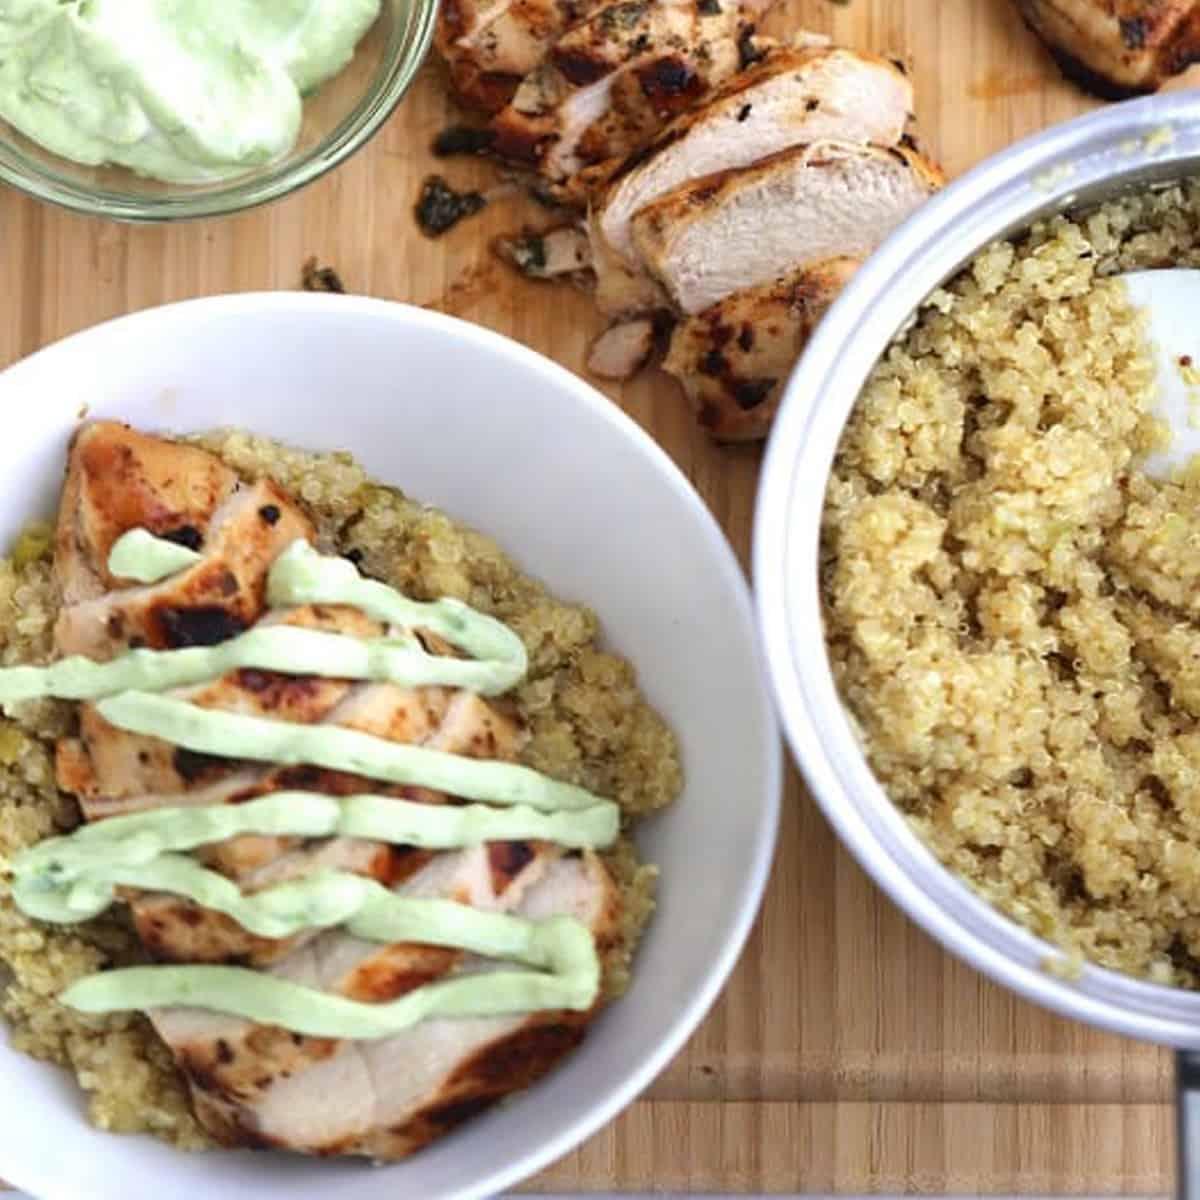 grilled cilantro lime chicken with quinoa, An incredibly juicy and falvorful Cilantro Lime Chicken on a bed of the most delicious Quinoa! chicken with avocado sauce.